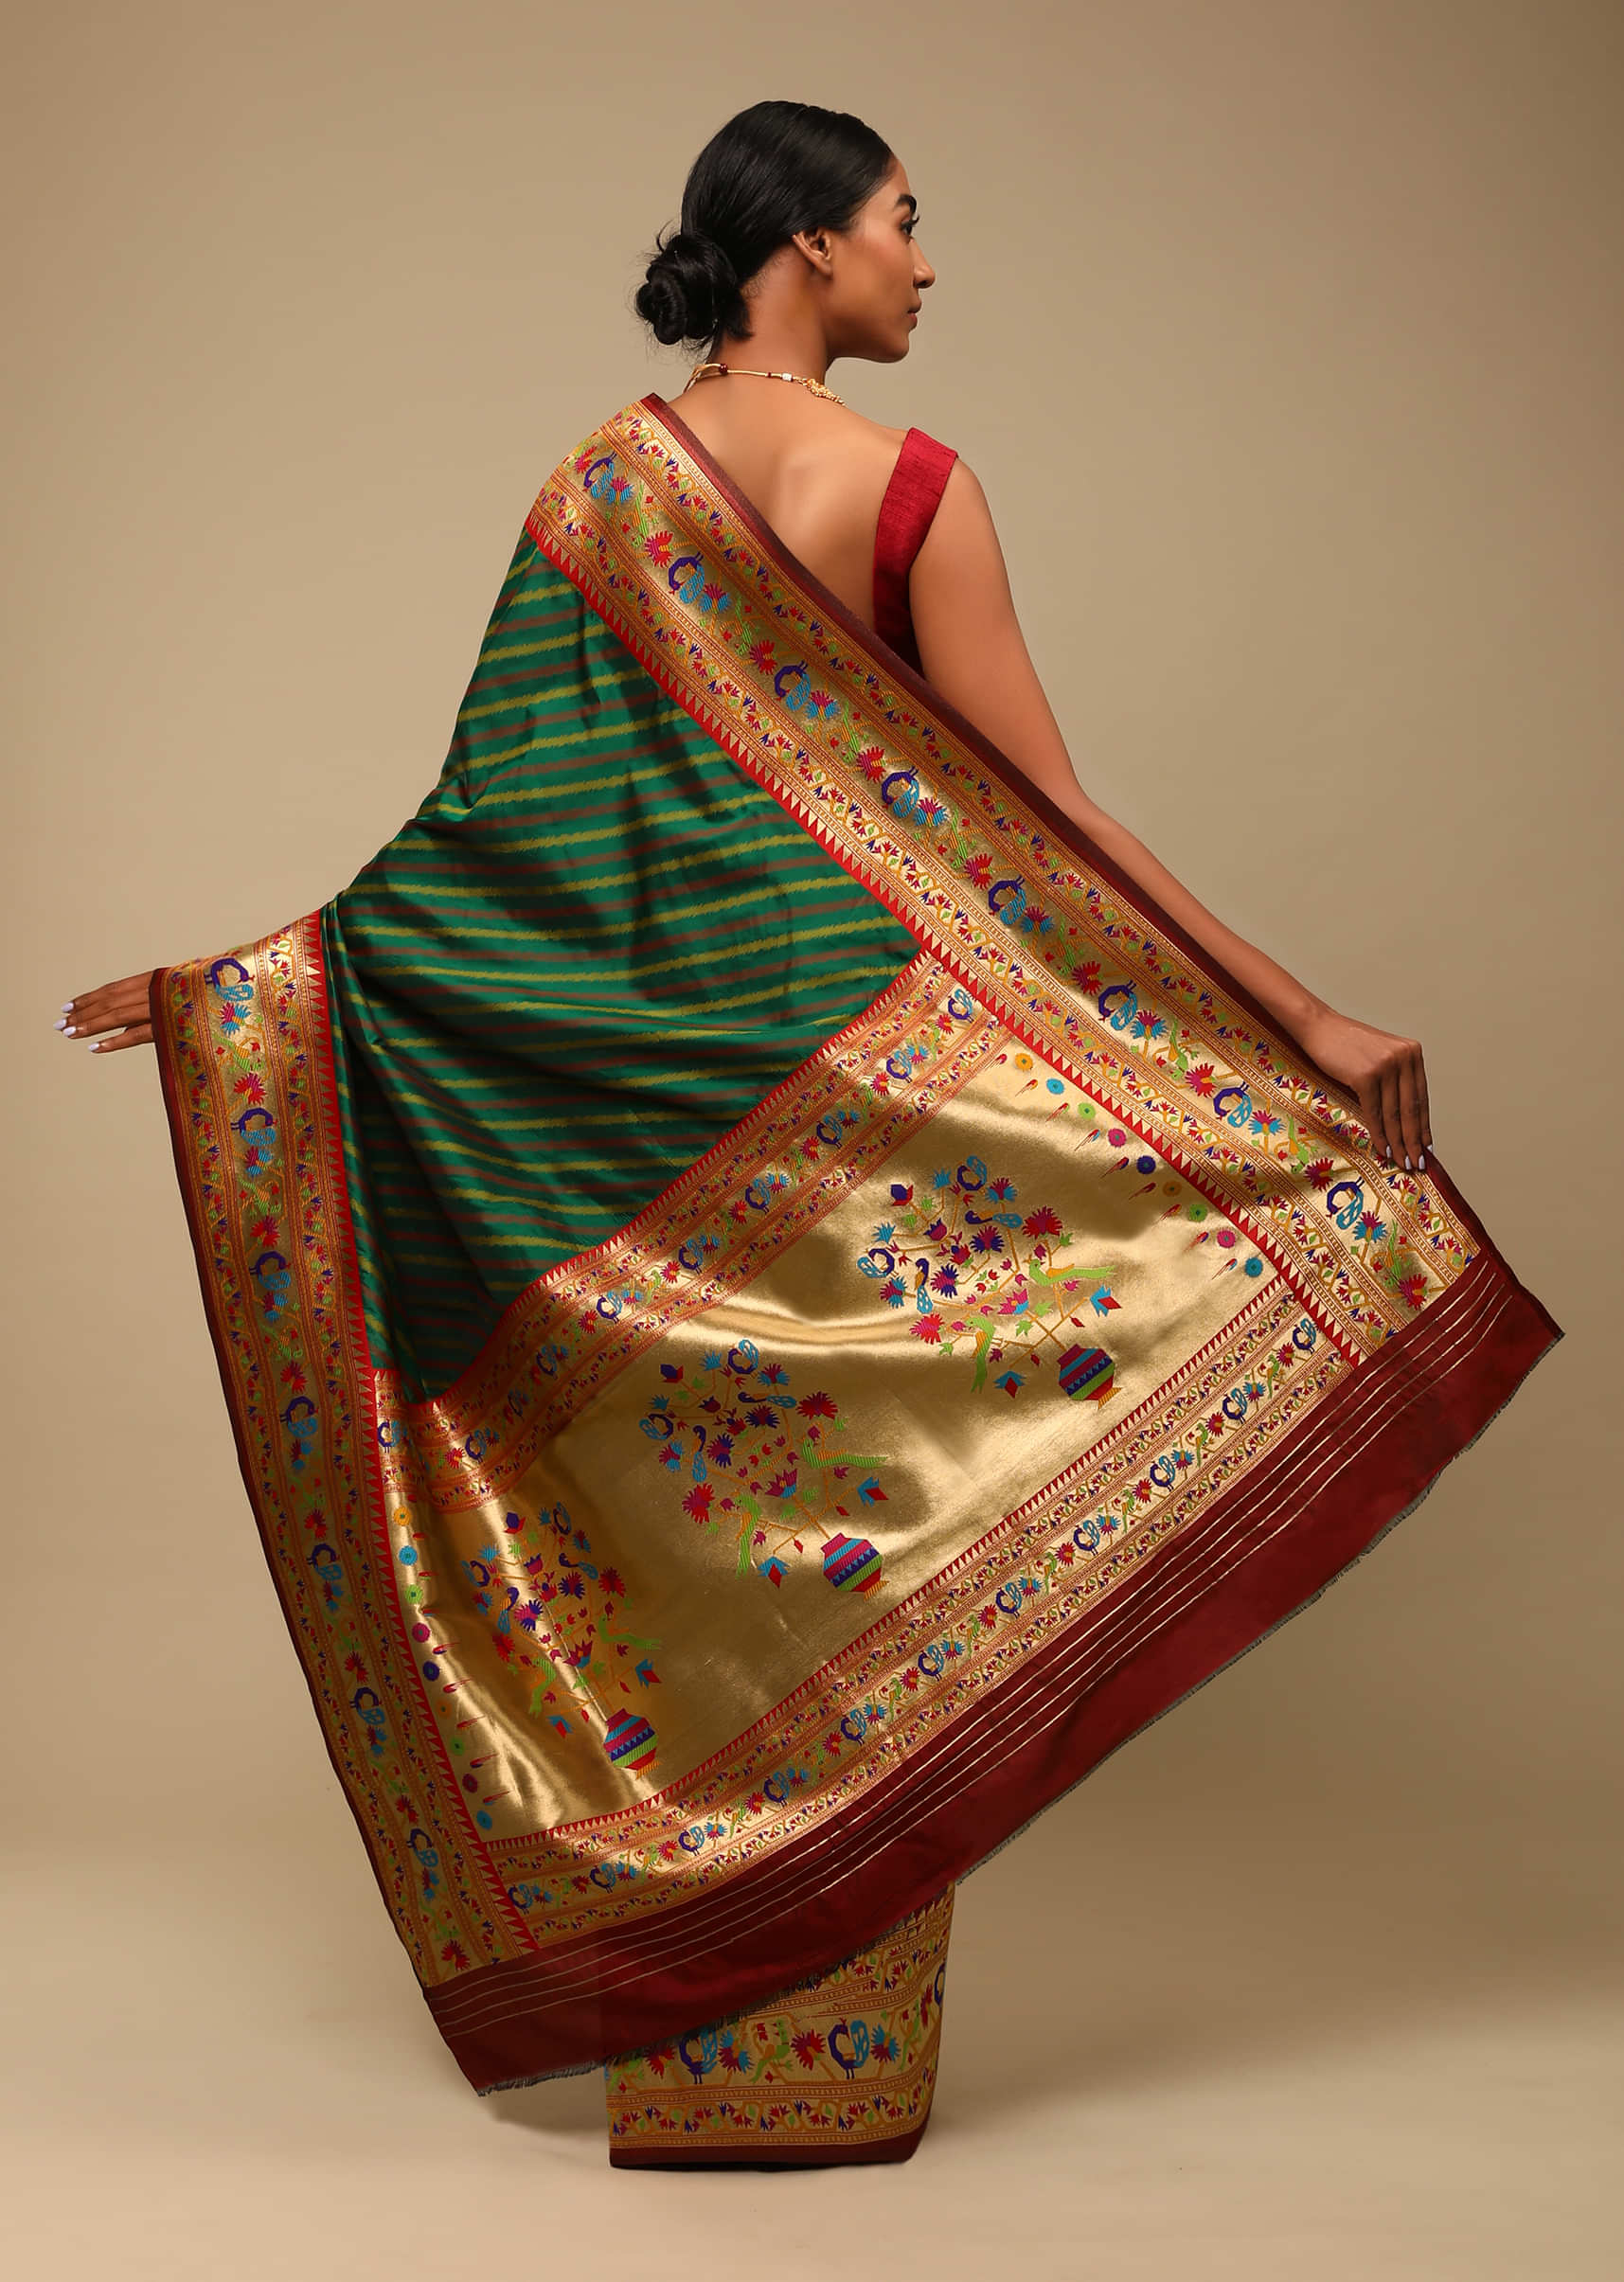 Bottle Green Saree In Art Handloom Silk With Woven Multi Colored Peacock Motifs On The Border, Diagonal Stripes And Unstitched Blouse  